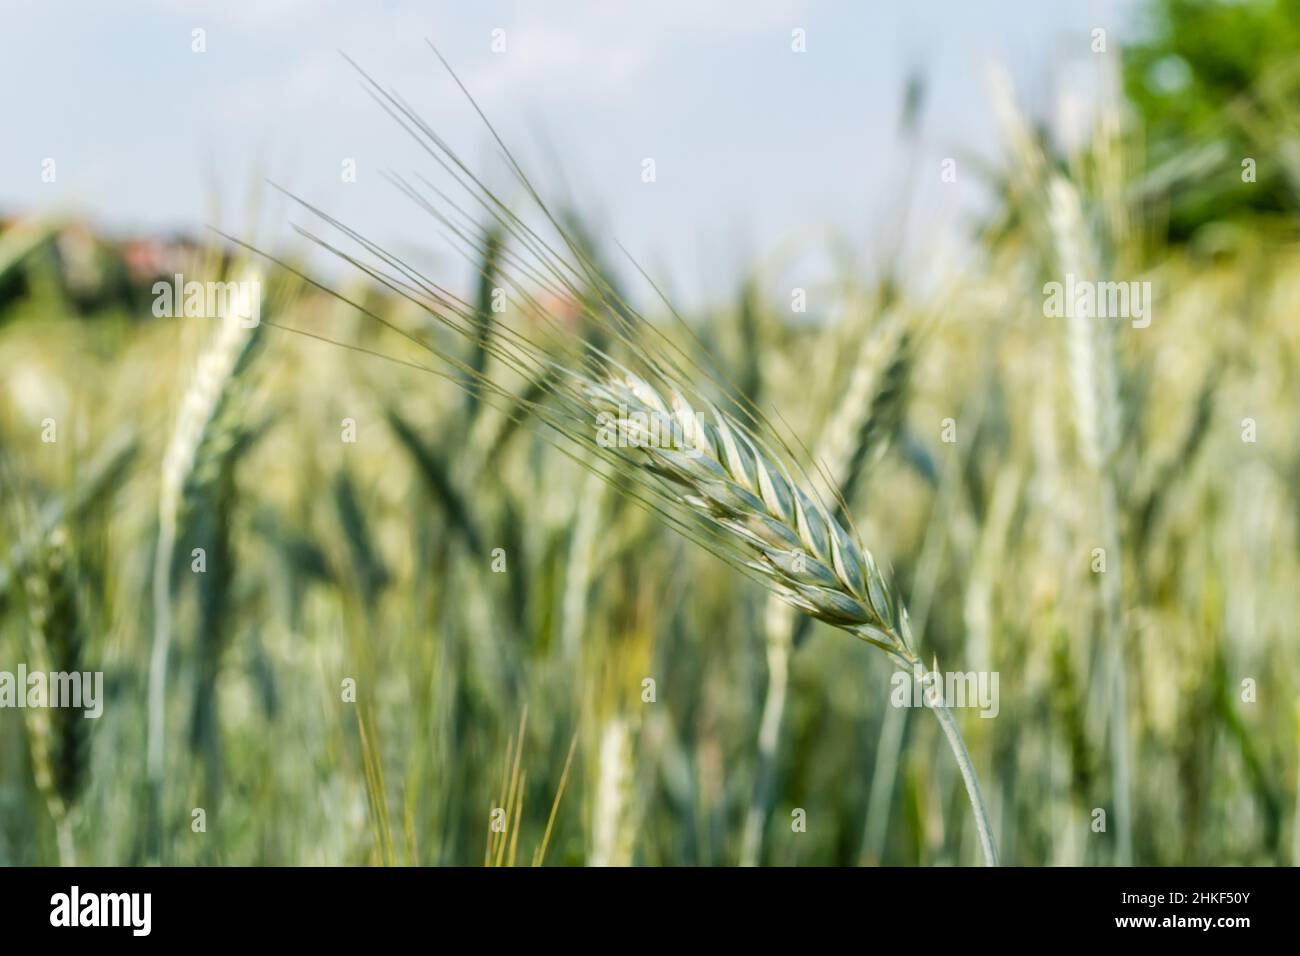 Flowering Phase of Wheat Plants Cultivated in the Farm Field Stock Photo